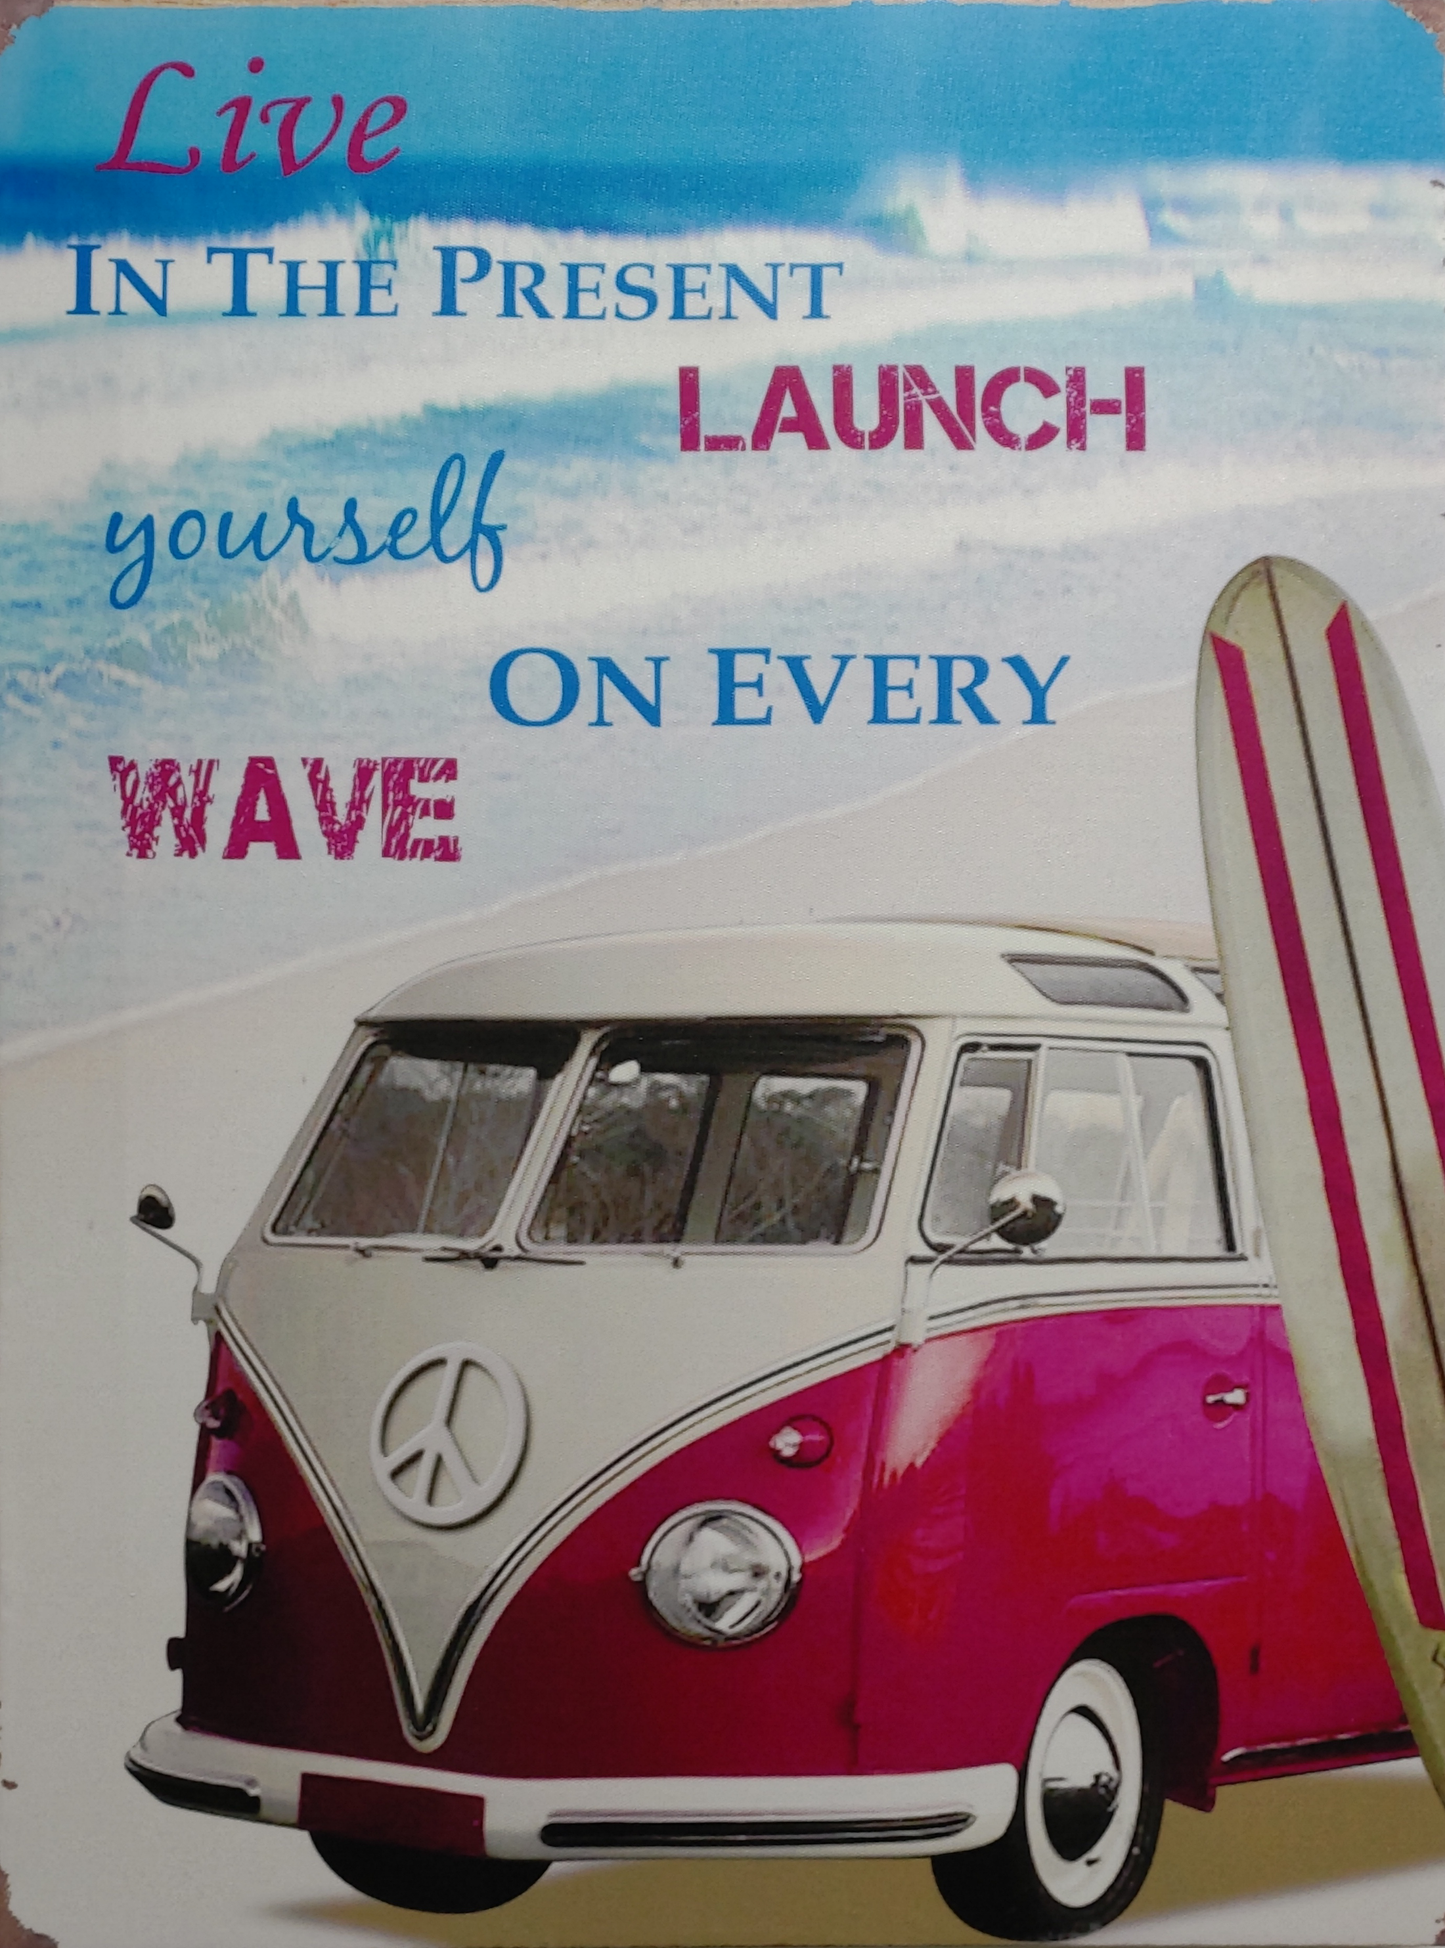 VW KOMBI - LIVE IN THE PRESENT LAUNCH YOURSELF ON EVERY WAVE CANVAS PRINT